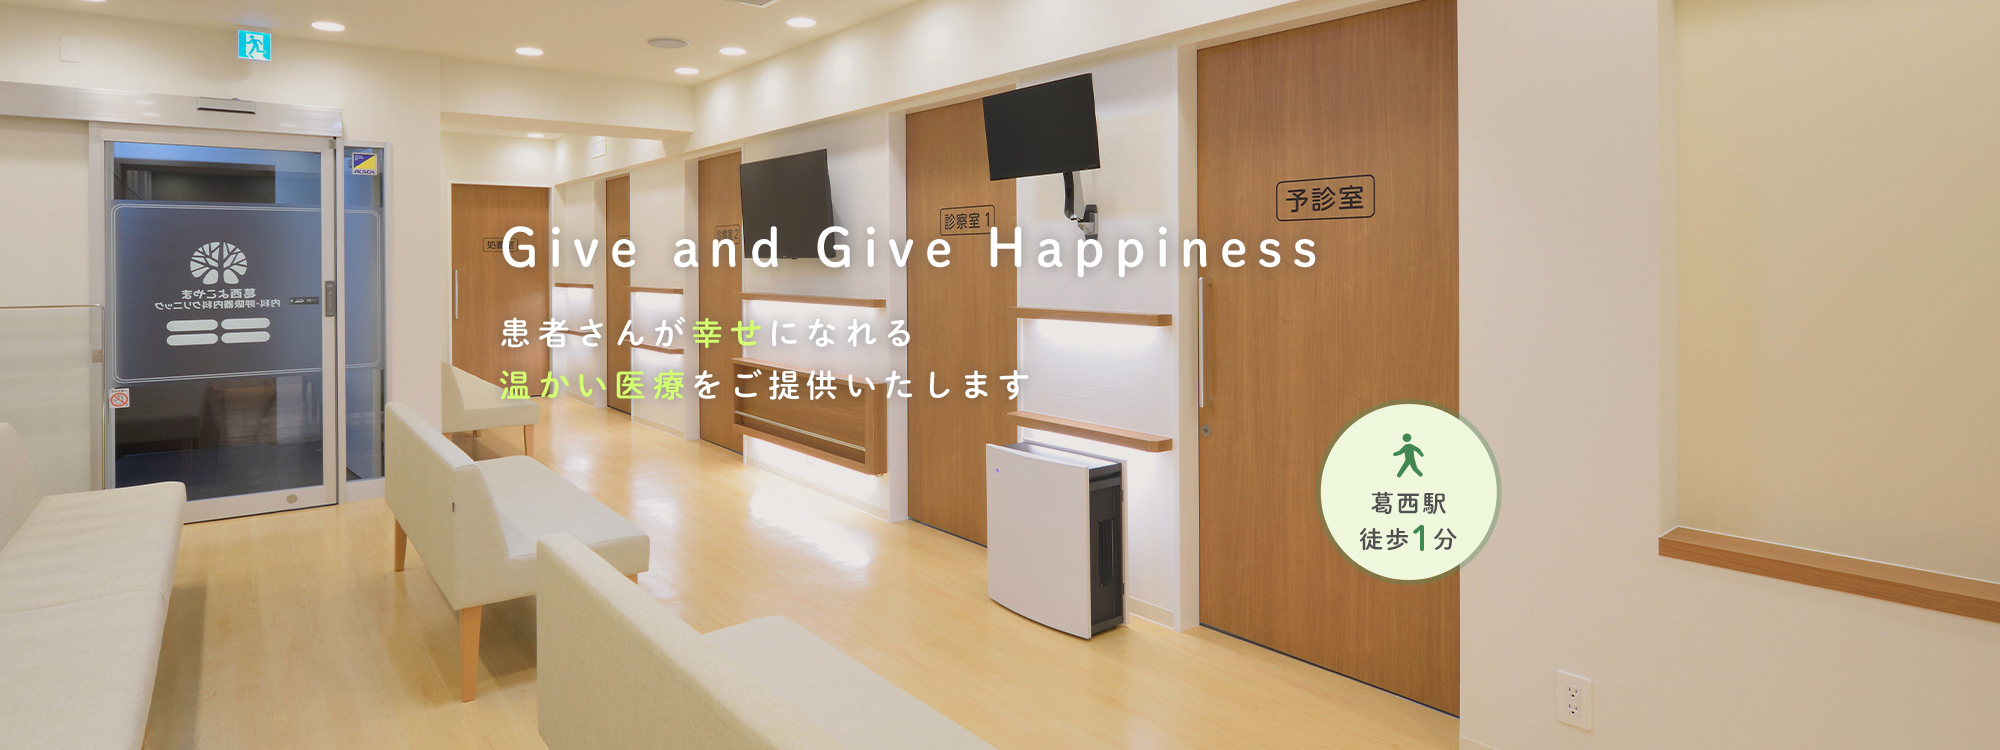 Give and Give Happiness 患者さんが幸せになれる温かい医療をご提供いたします